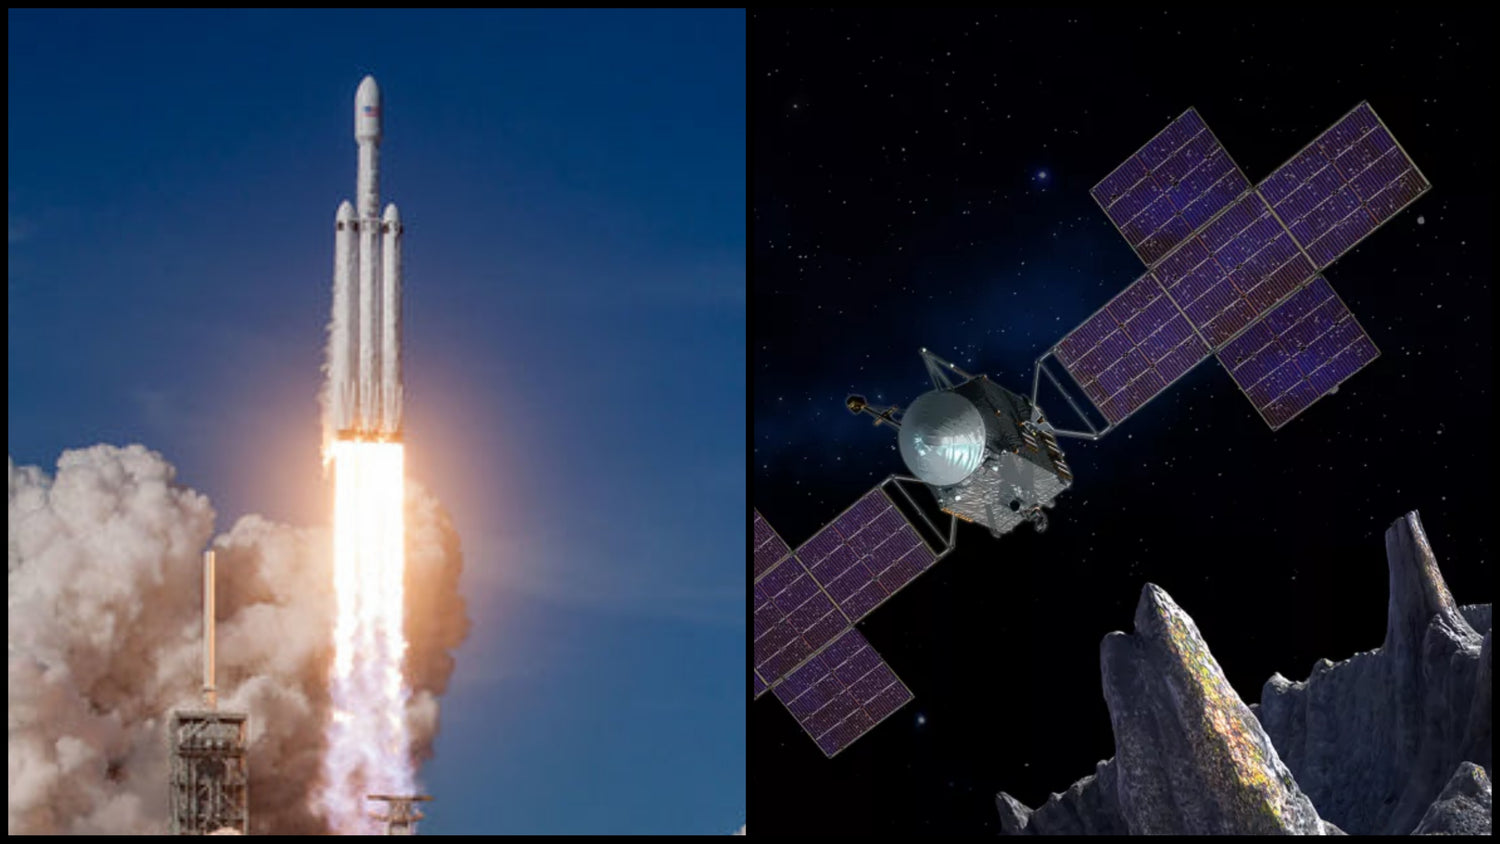 NASA delays Psyche asteroid mining mission, SpaceX Falcon Heavy will now launch it until 2023